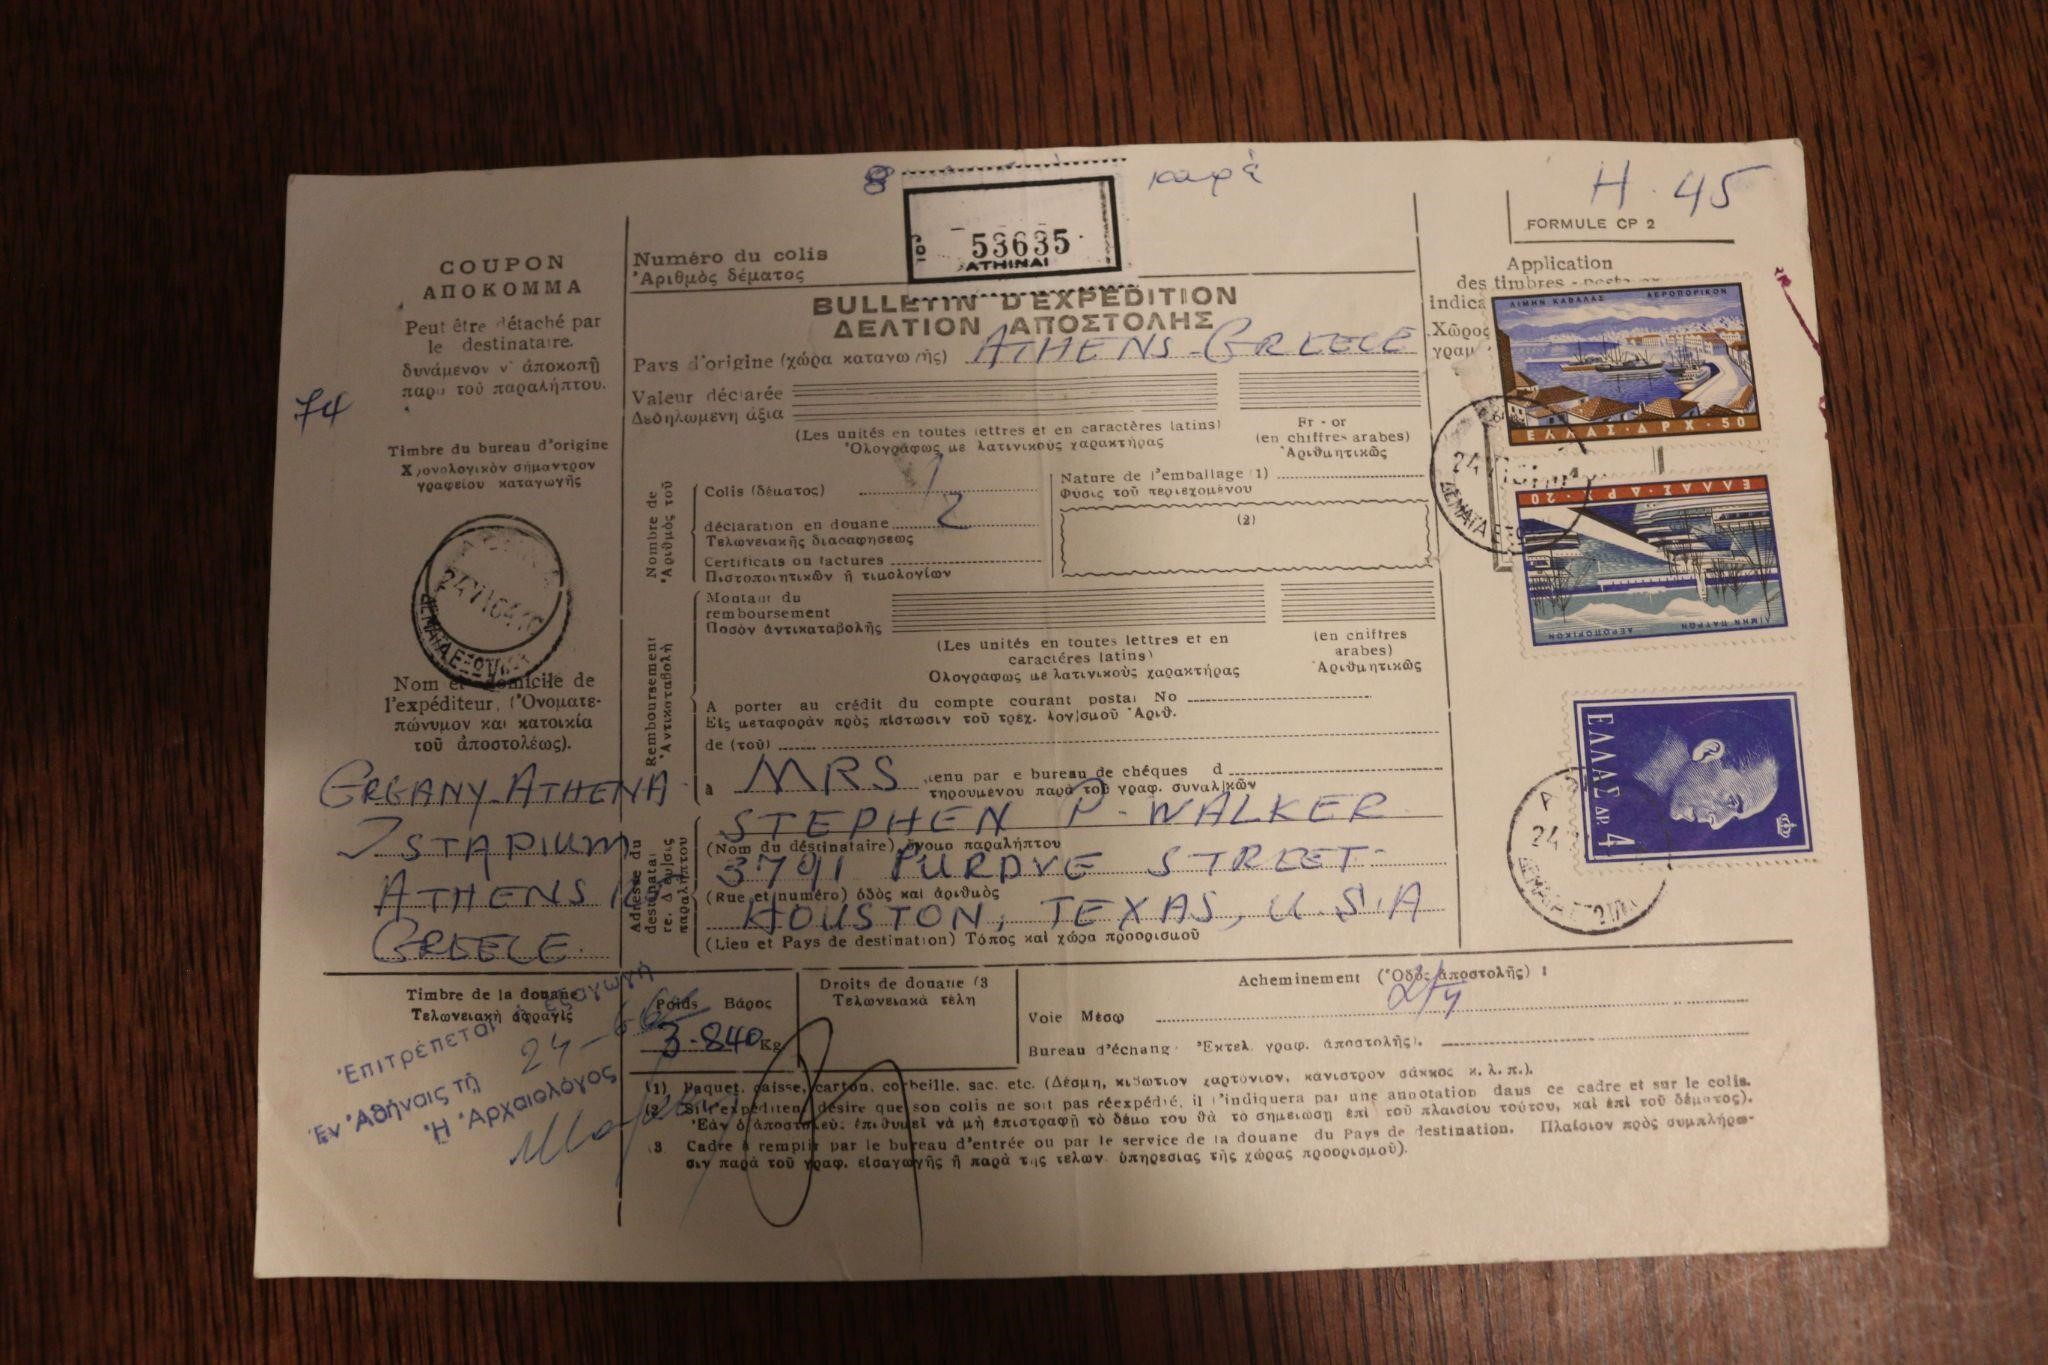 Greek Bullet D Expedition Receipt w/ Stamps